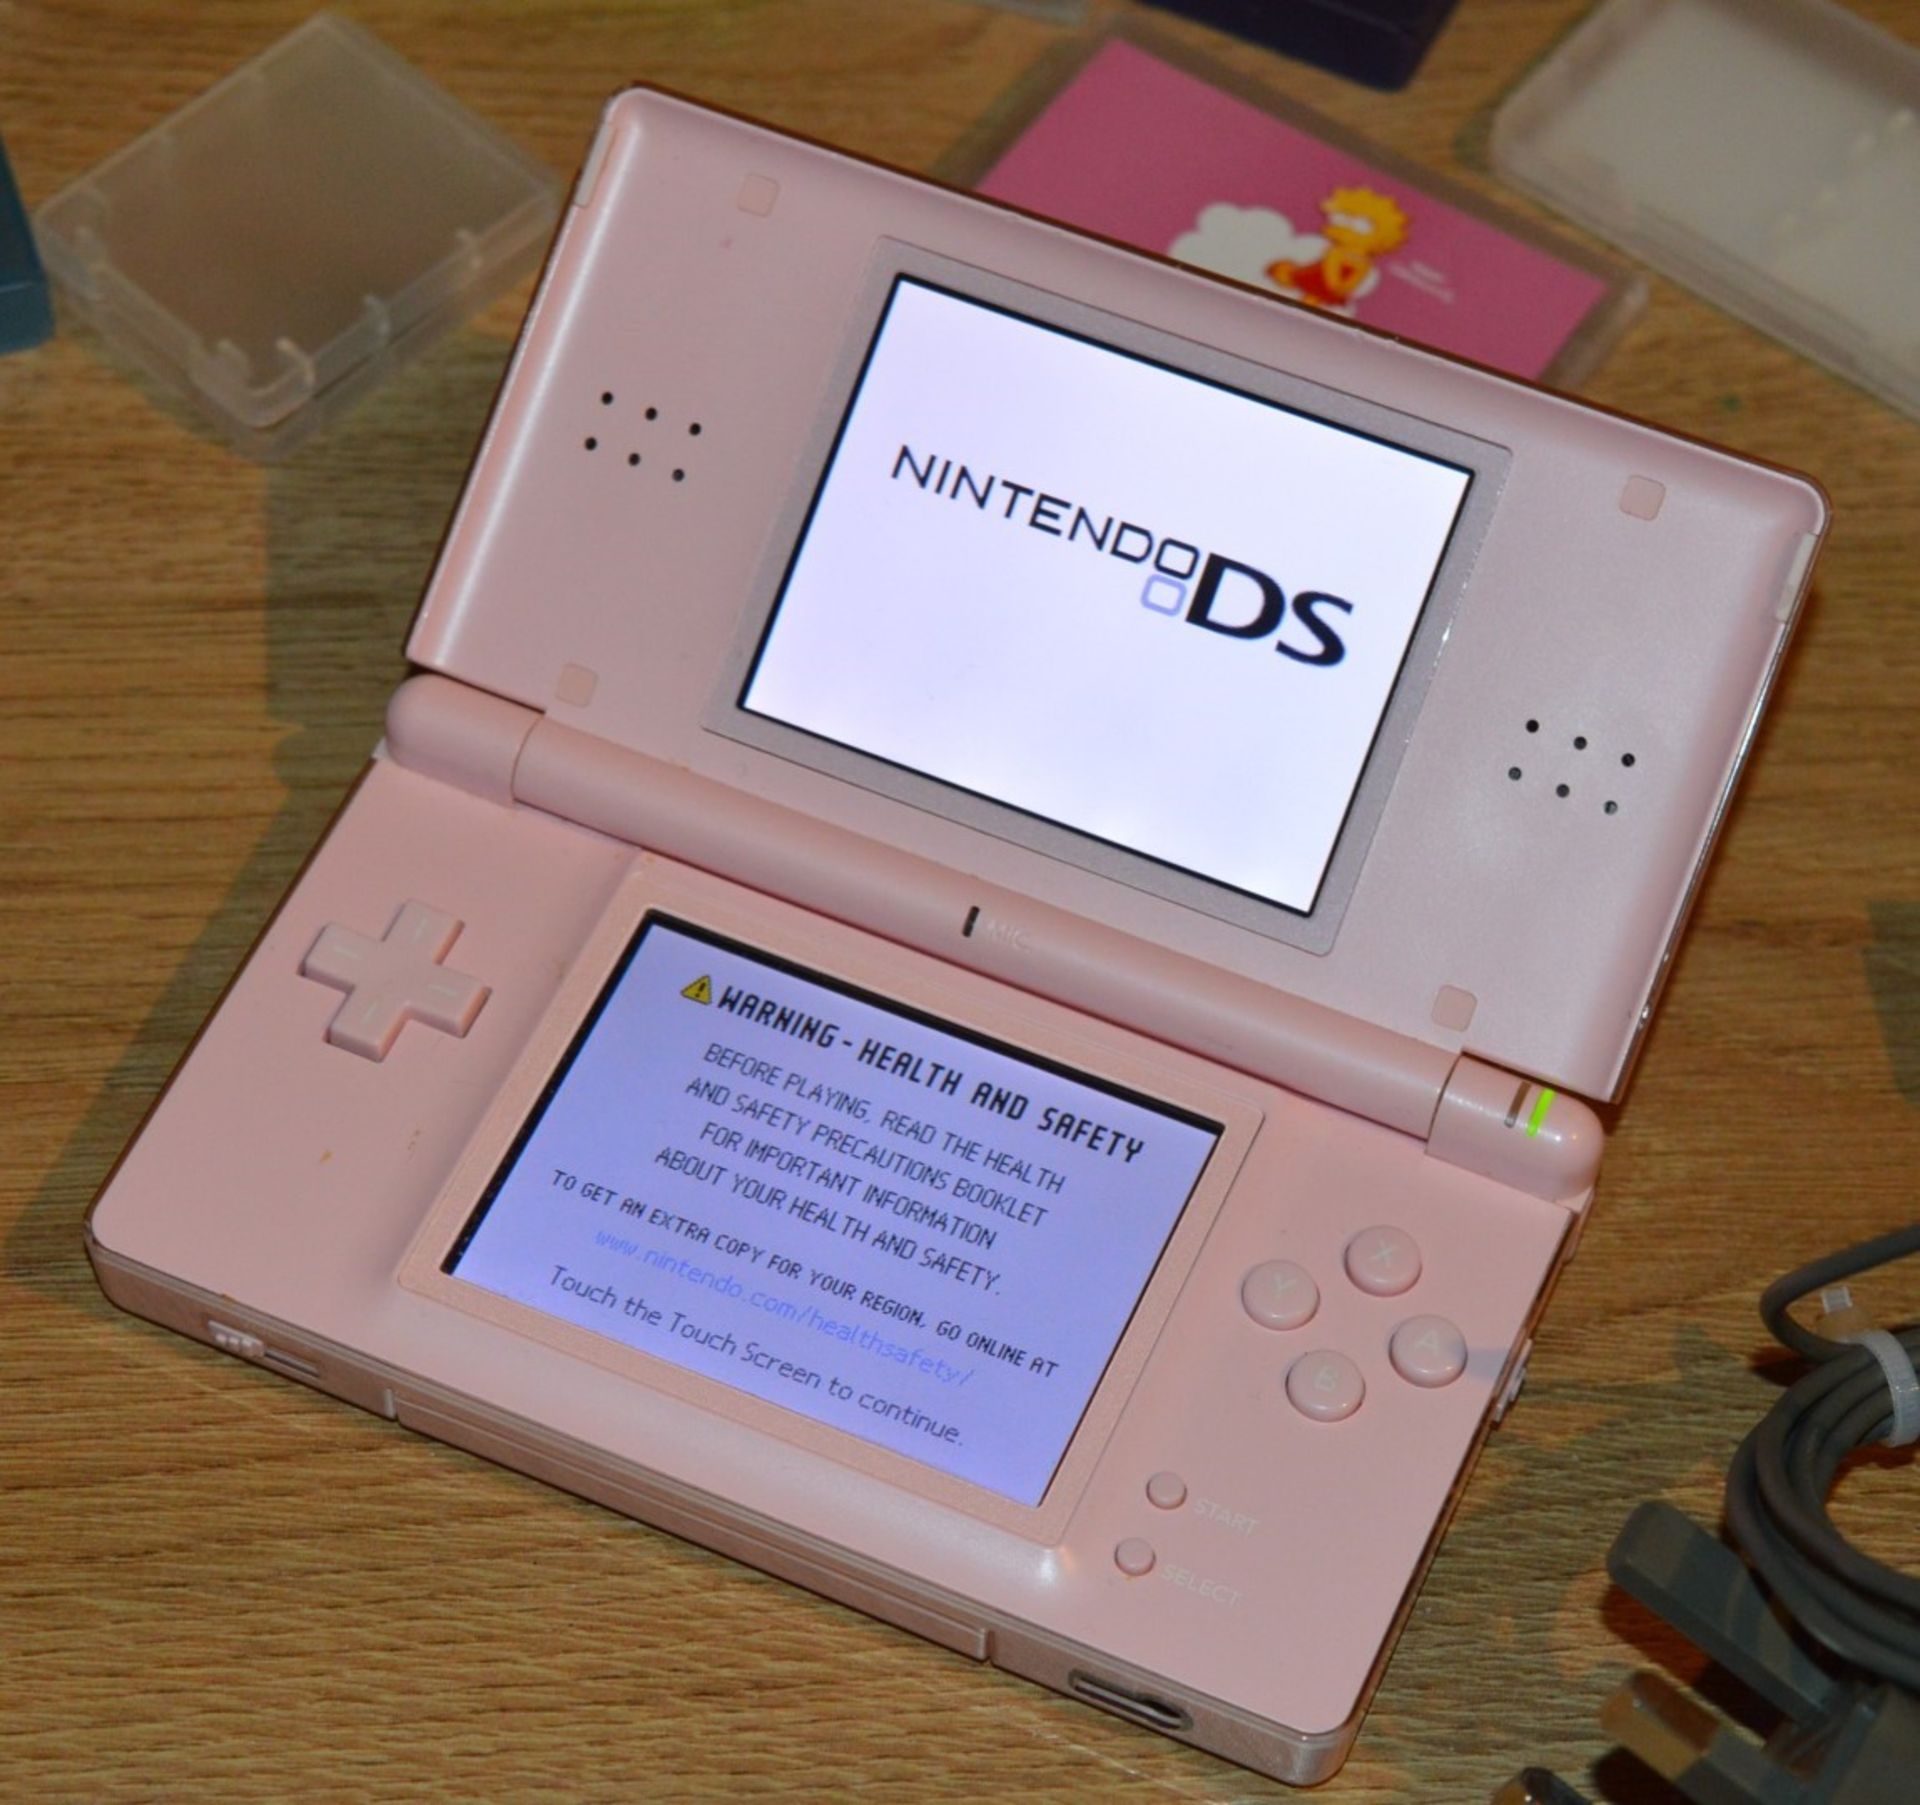 1 x Nintendo DS Pink Handheld Games Console - Includes Accessory Pack, Protector Case, Charger and - Image 2 of 6